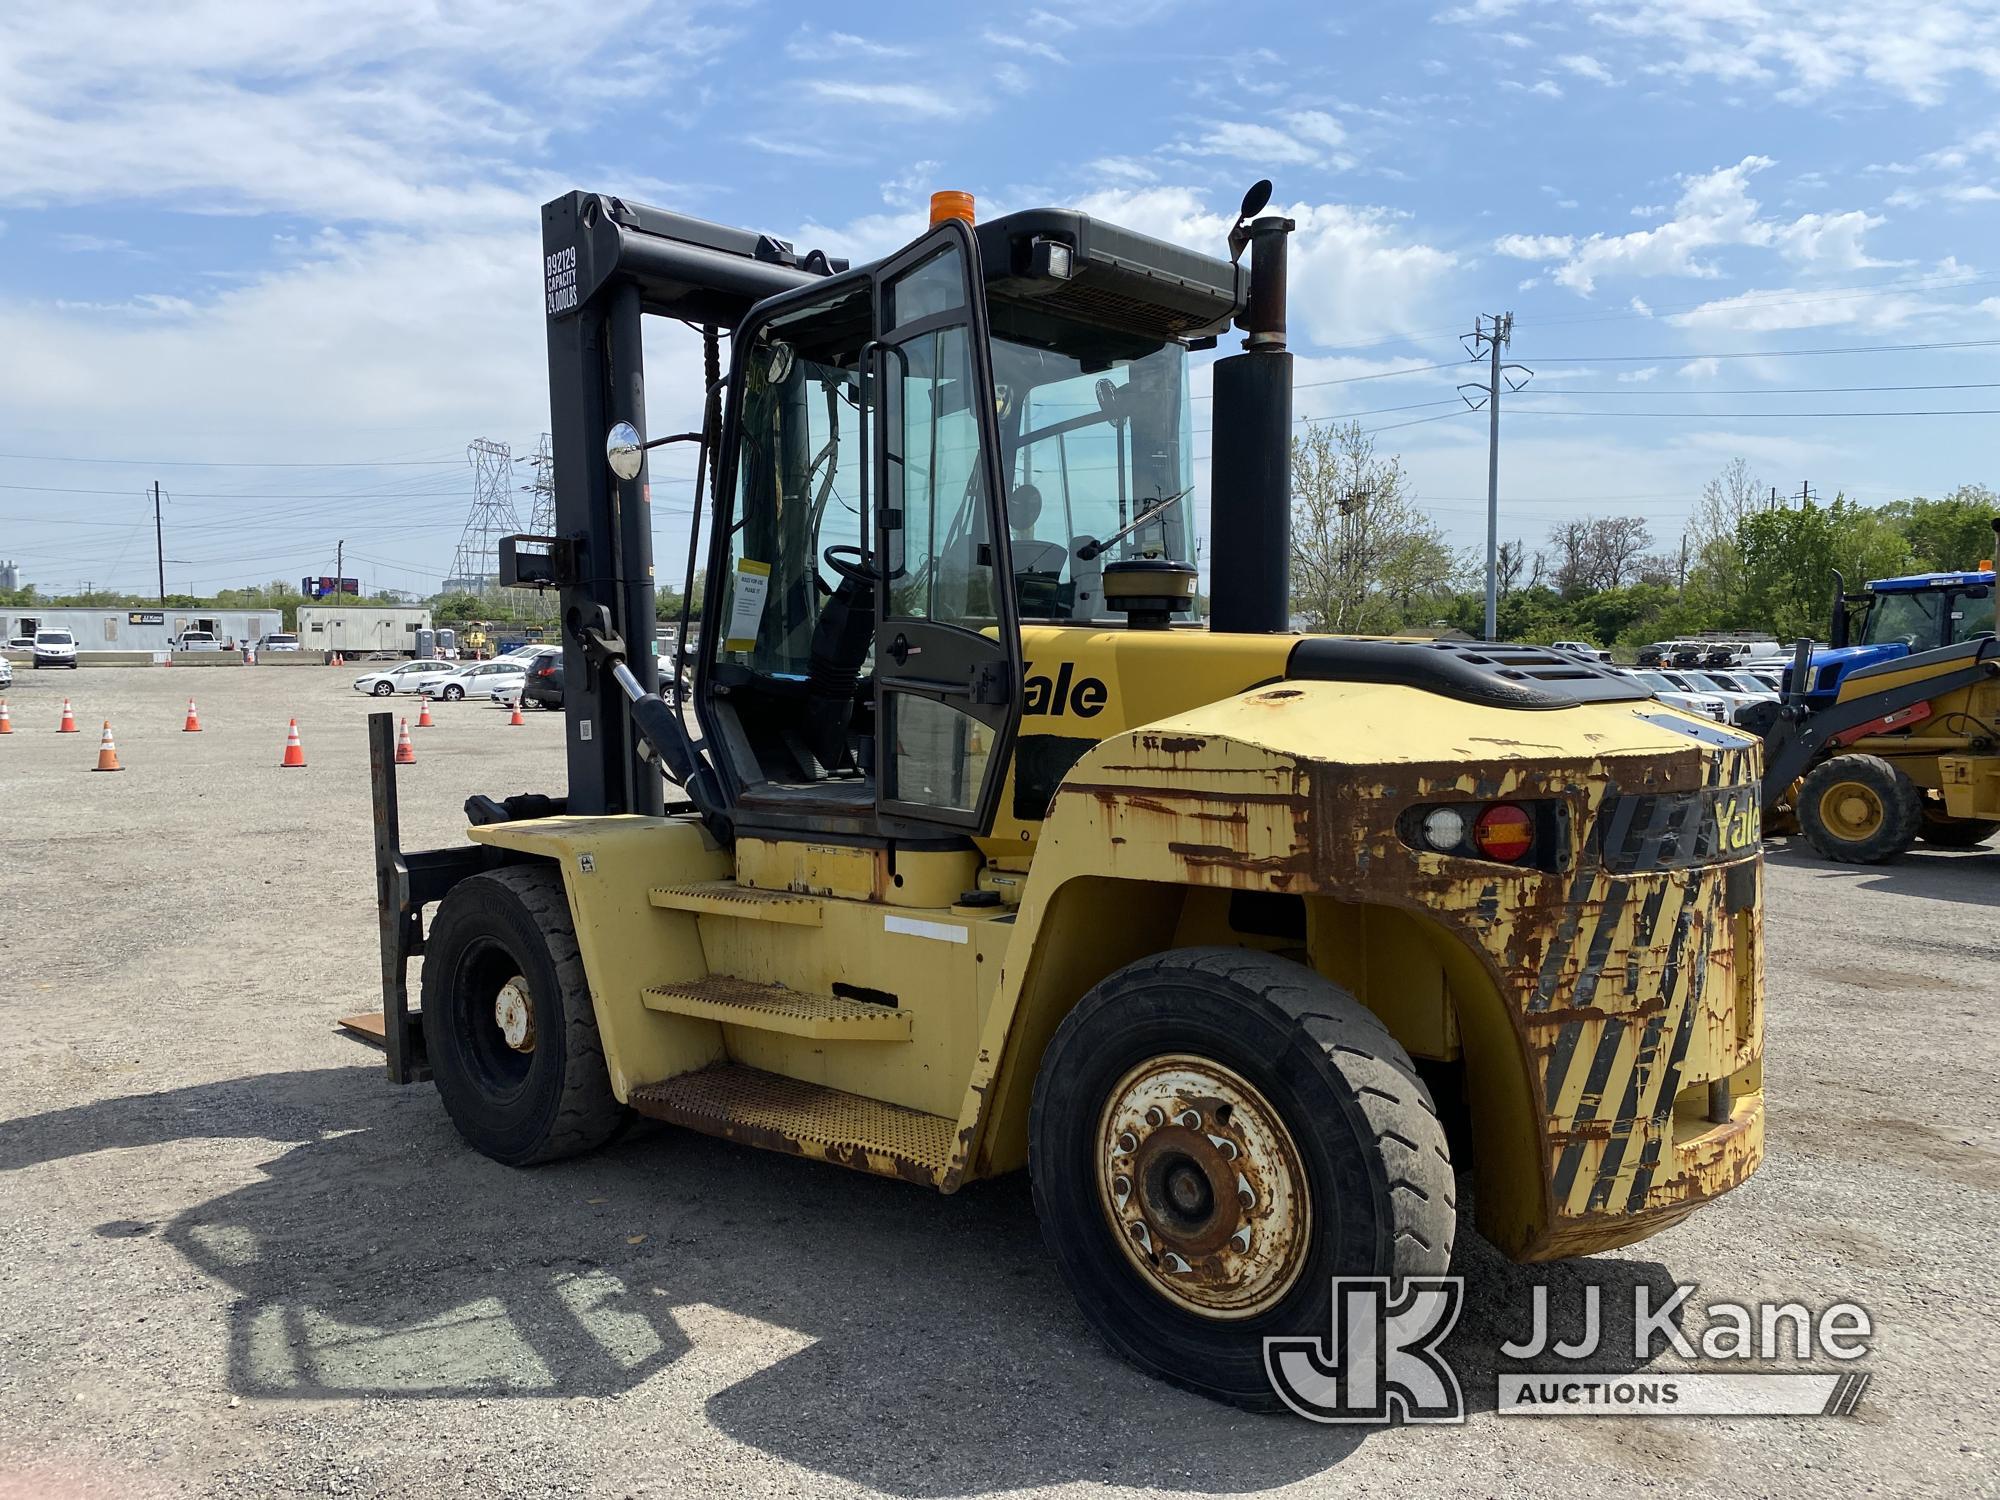 (Plymouth Meeting, PA) Yale GDP250DBECCV143 Pneumatic Tired Forklift Runs & Moves, Not Charging